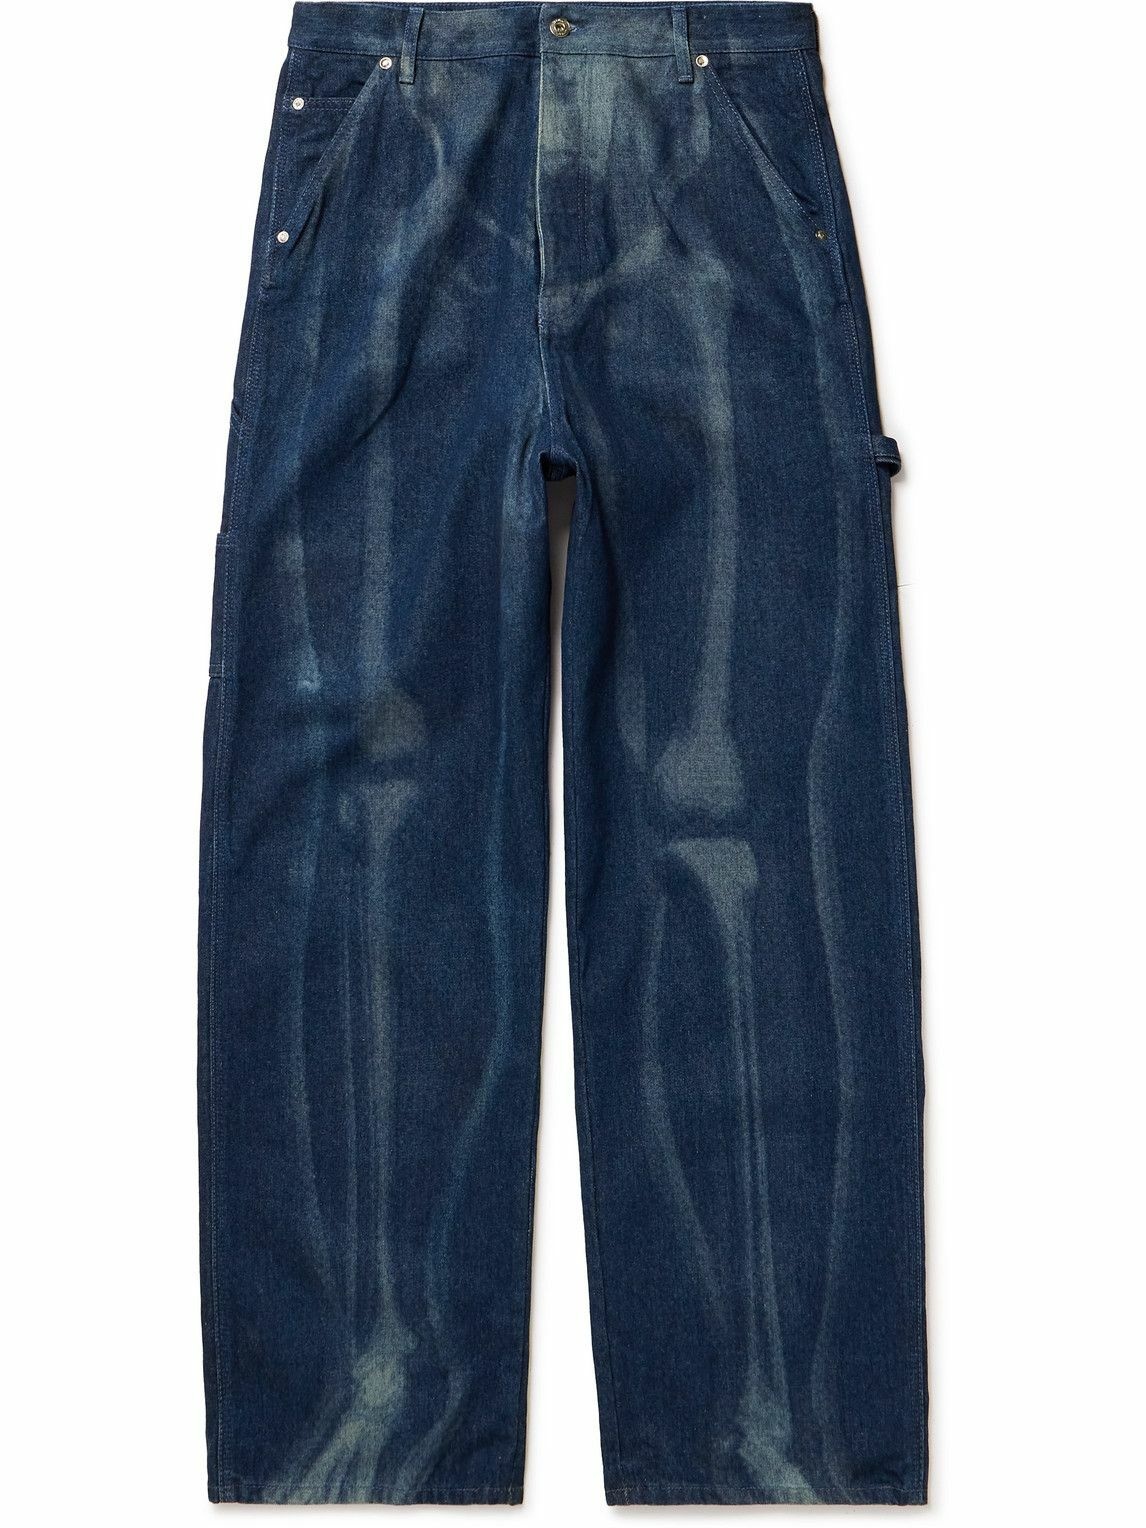 Off-White - Printed Wide-Leg Jeans - Blue Off-White